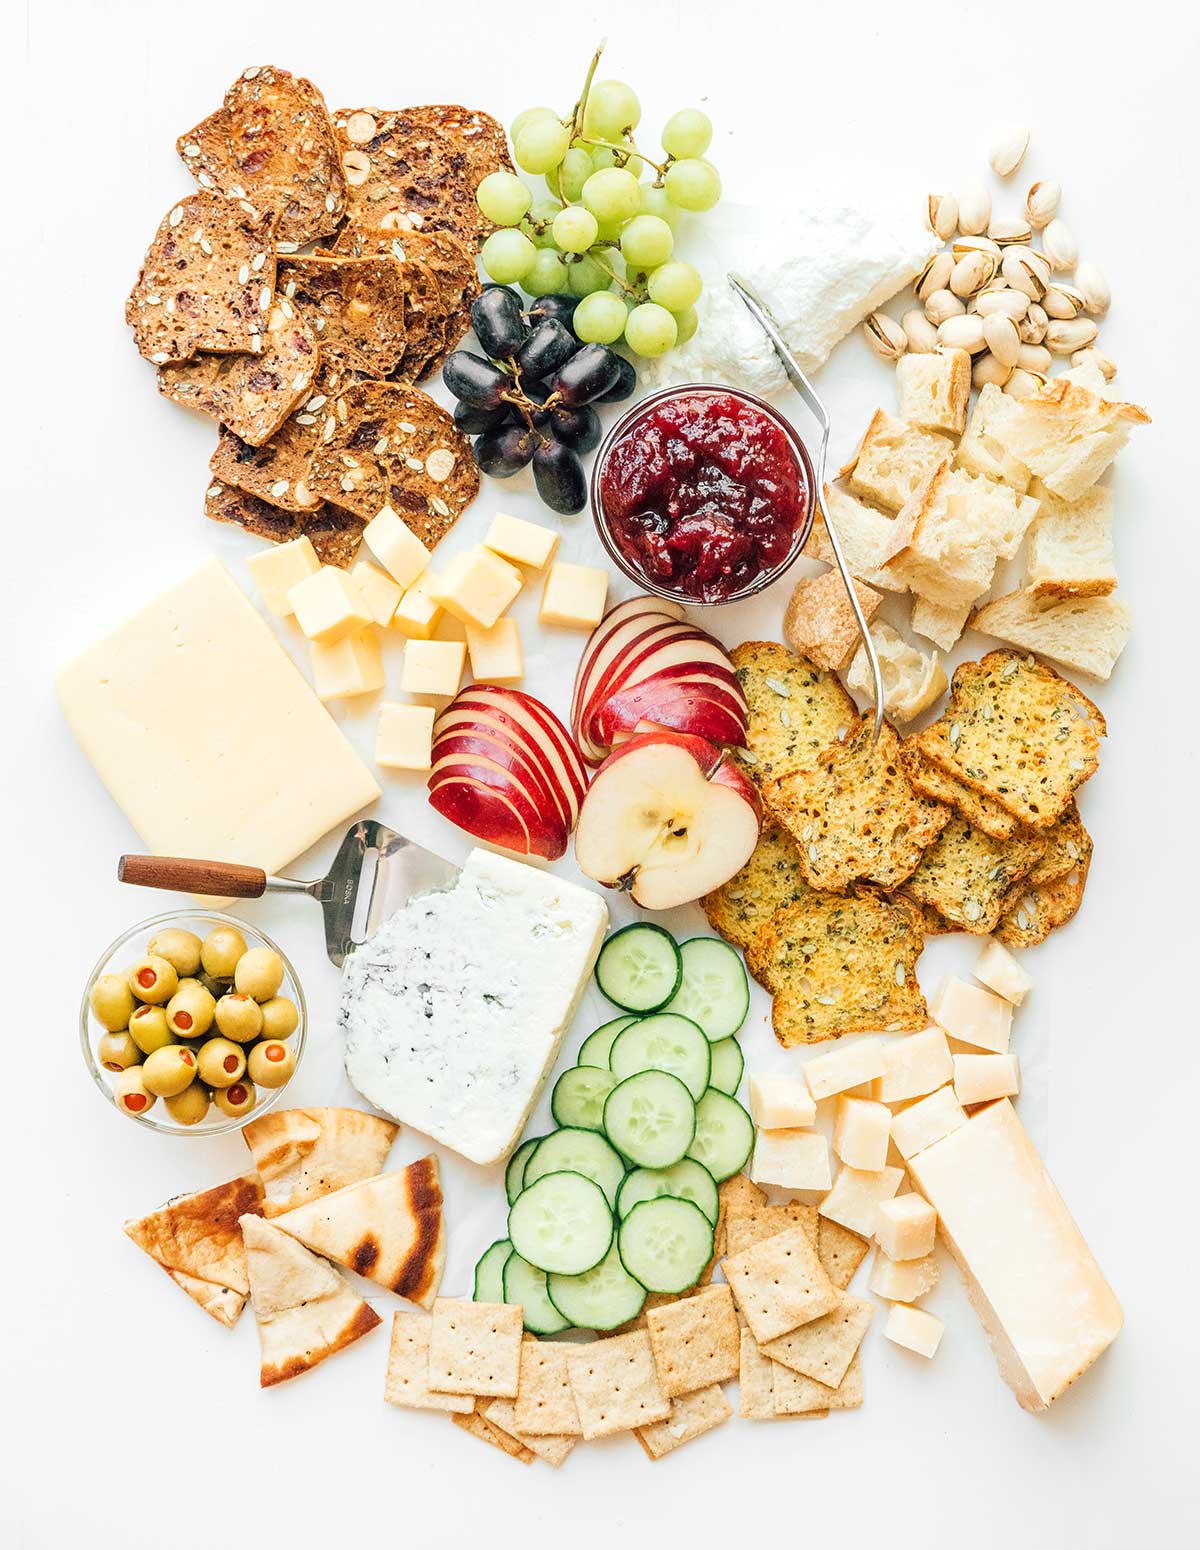 A cheese board complete with various crackers, cheeses, fruits, veggies, spreads, nuts, and olives